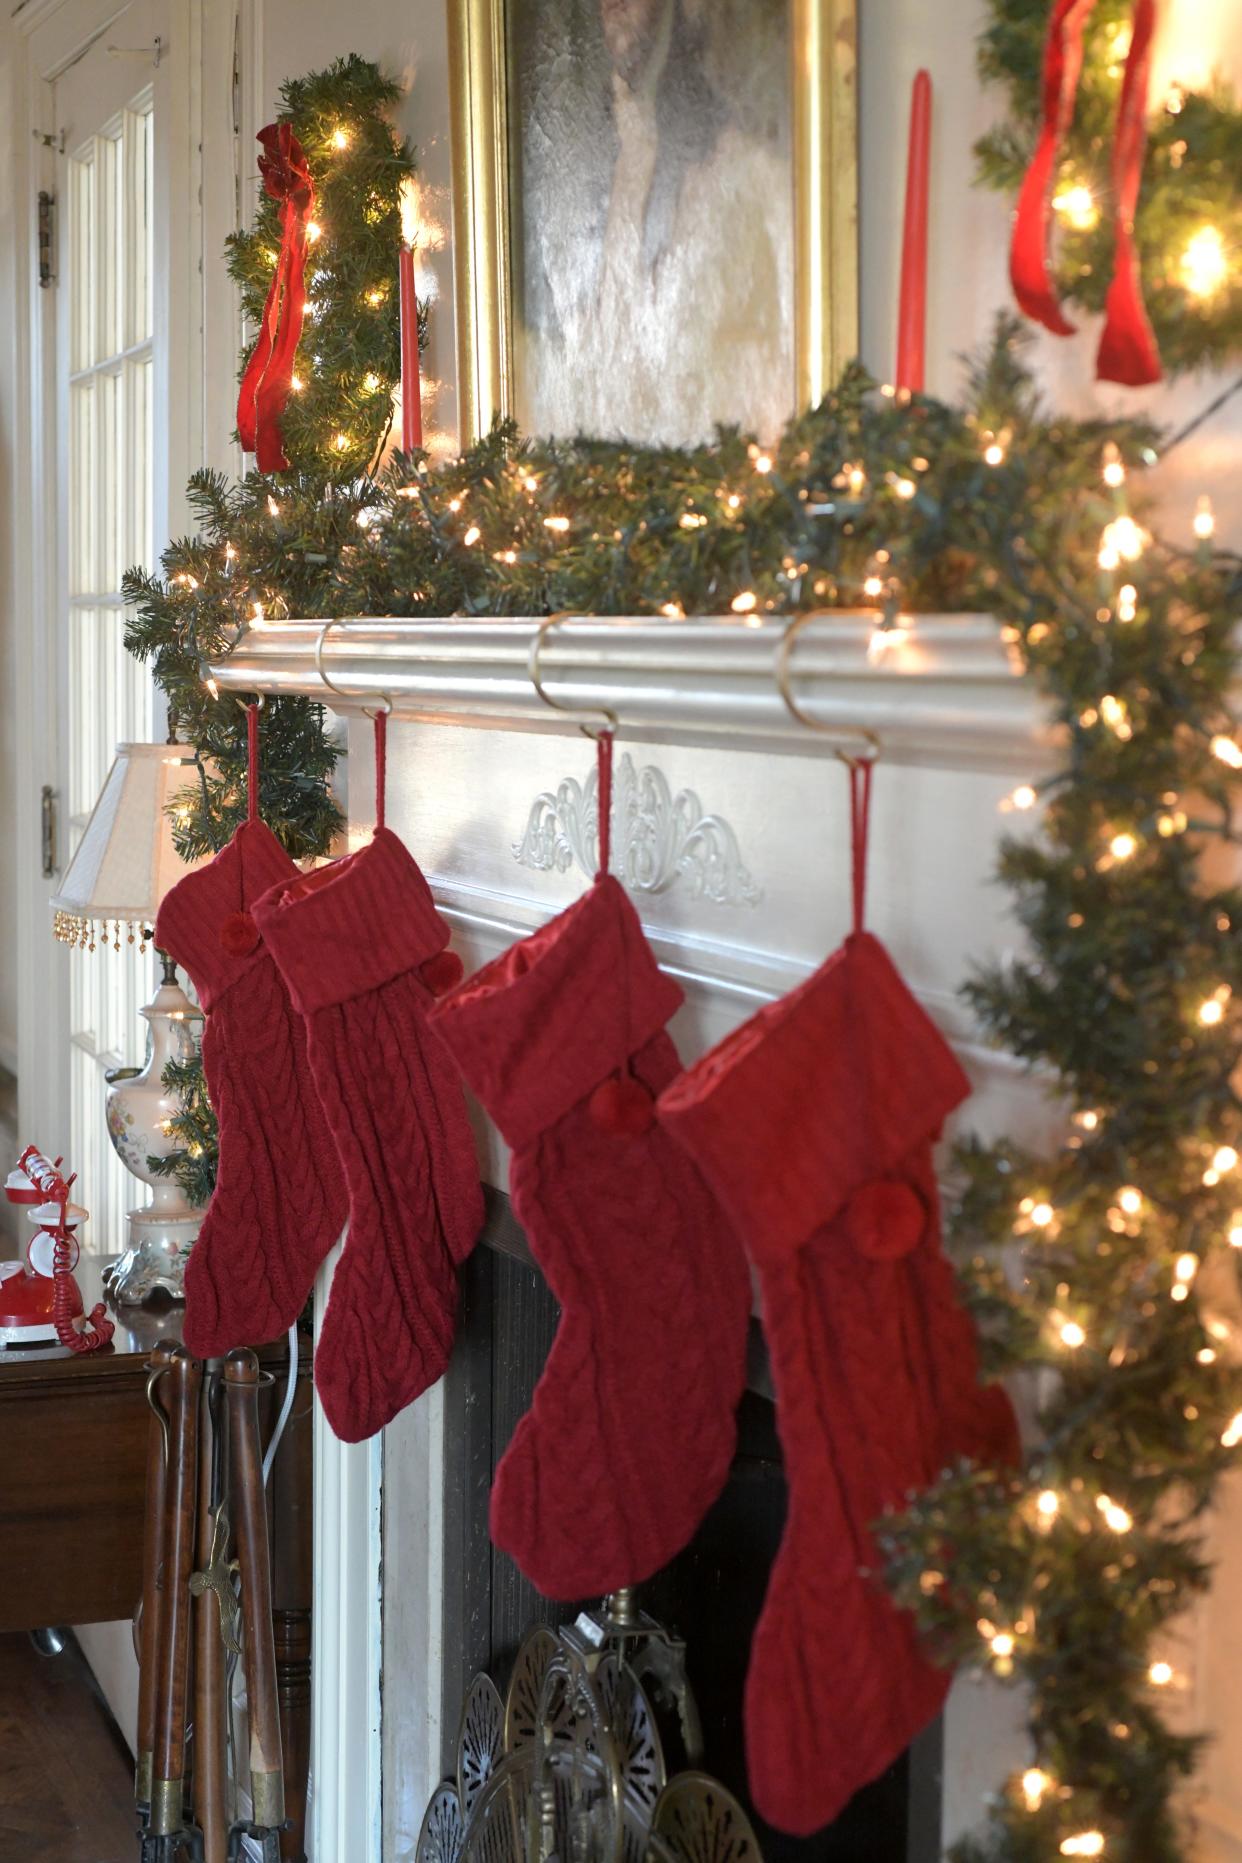 Christmas decorations brighten the Murray Baker House, one of six historical properties open for the Peoria Historical Society's Holiday Home Tour Dec. 3 and 4.